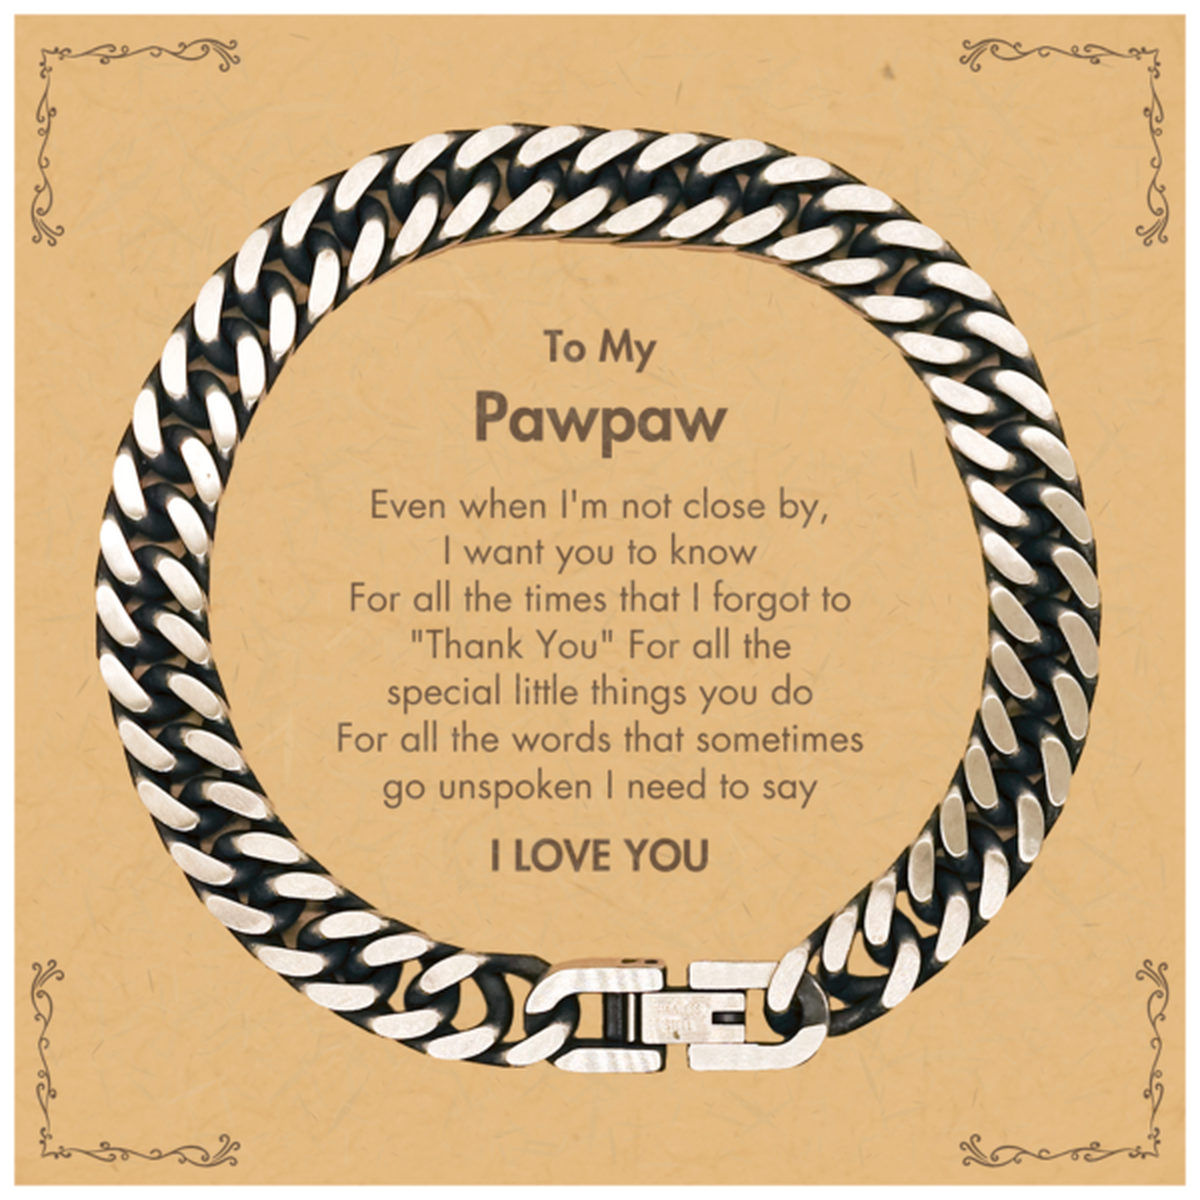 Thank You Gifts for Pawpaw, Keepsake Cuban Link Chain Bracelet Gifts for Pawpaw Birthday Mother's day Father's Day Pawpaw For all the words That sometimes go unspoken I need to say I LOVE YOU